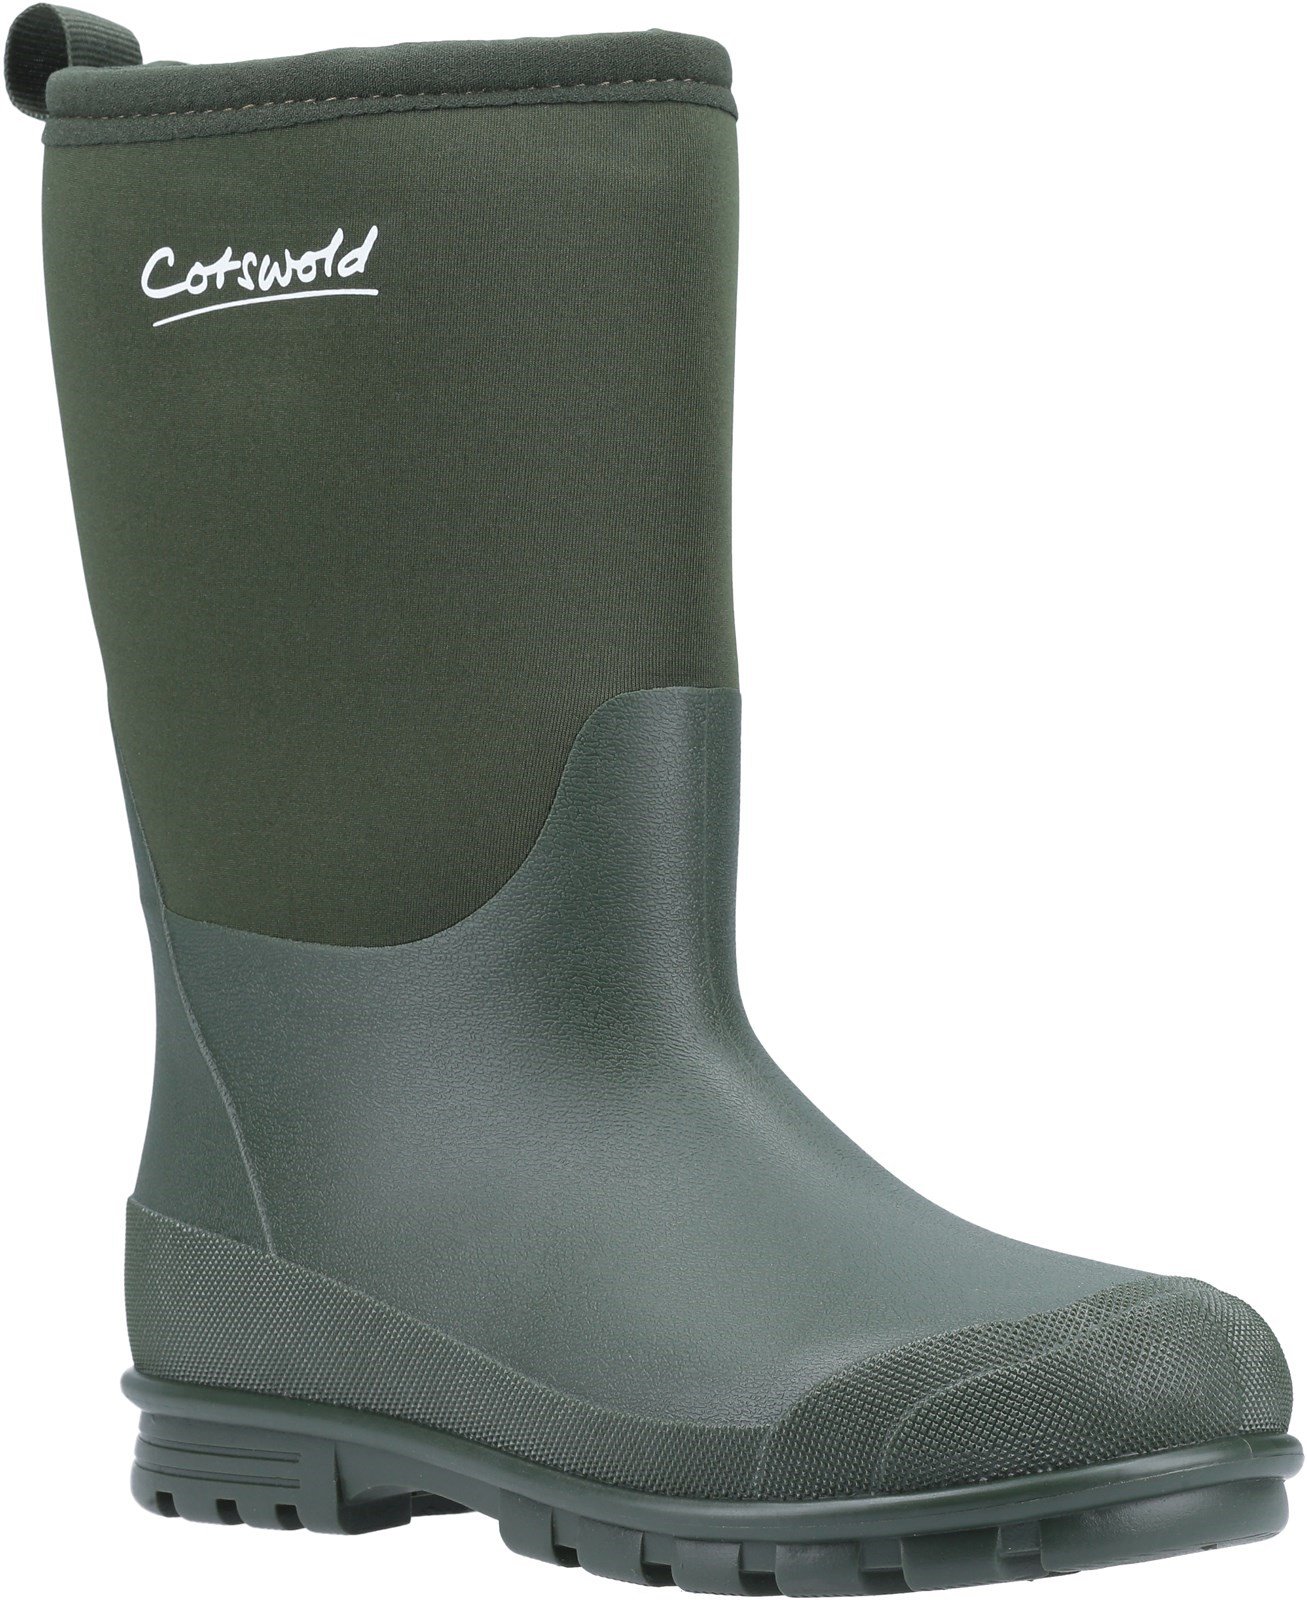 Cotswold Kids Hilly Neoprene Wellington Boot Various Colours 31492 - Green 11